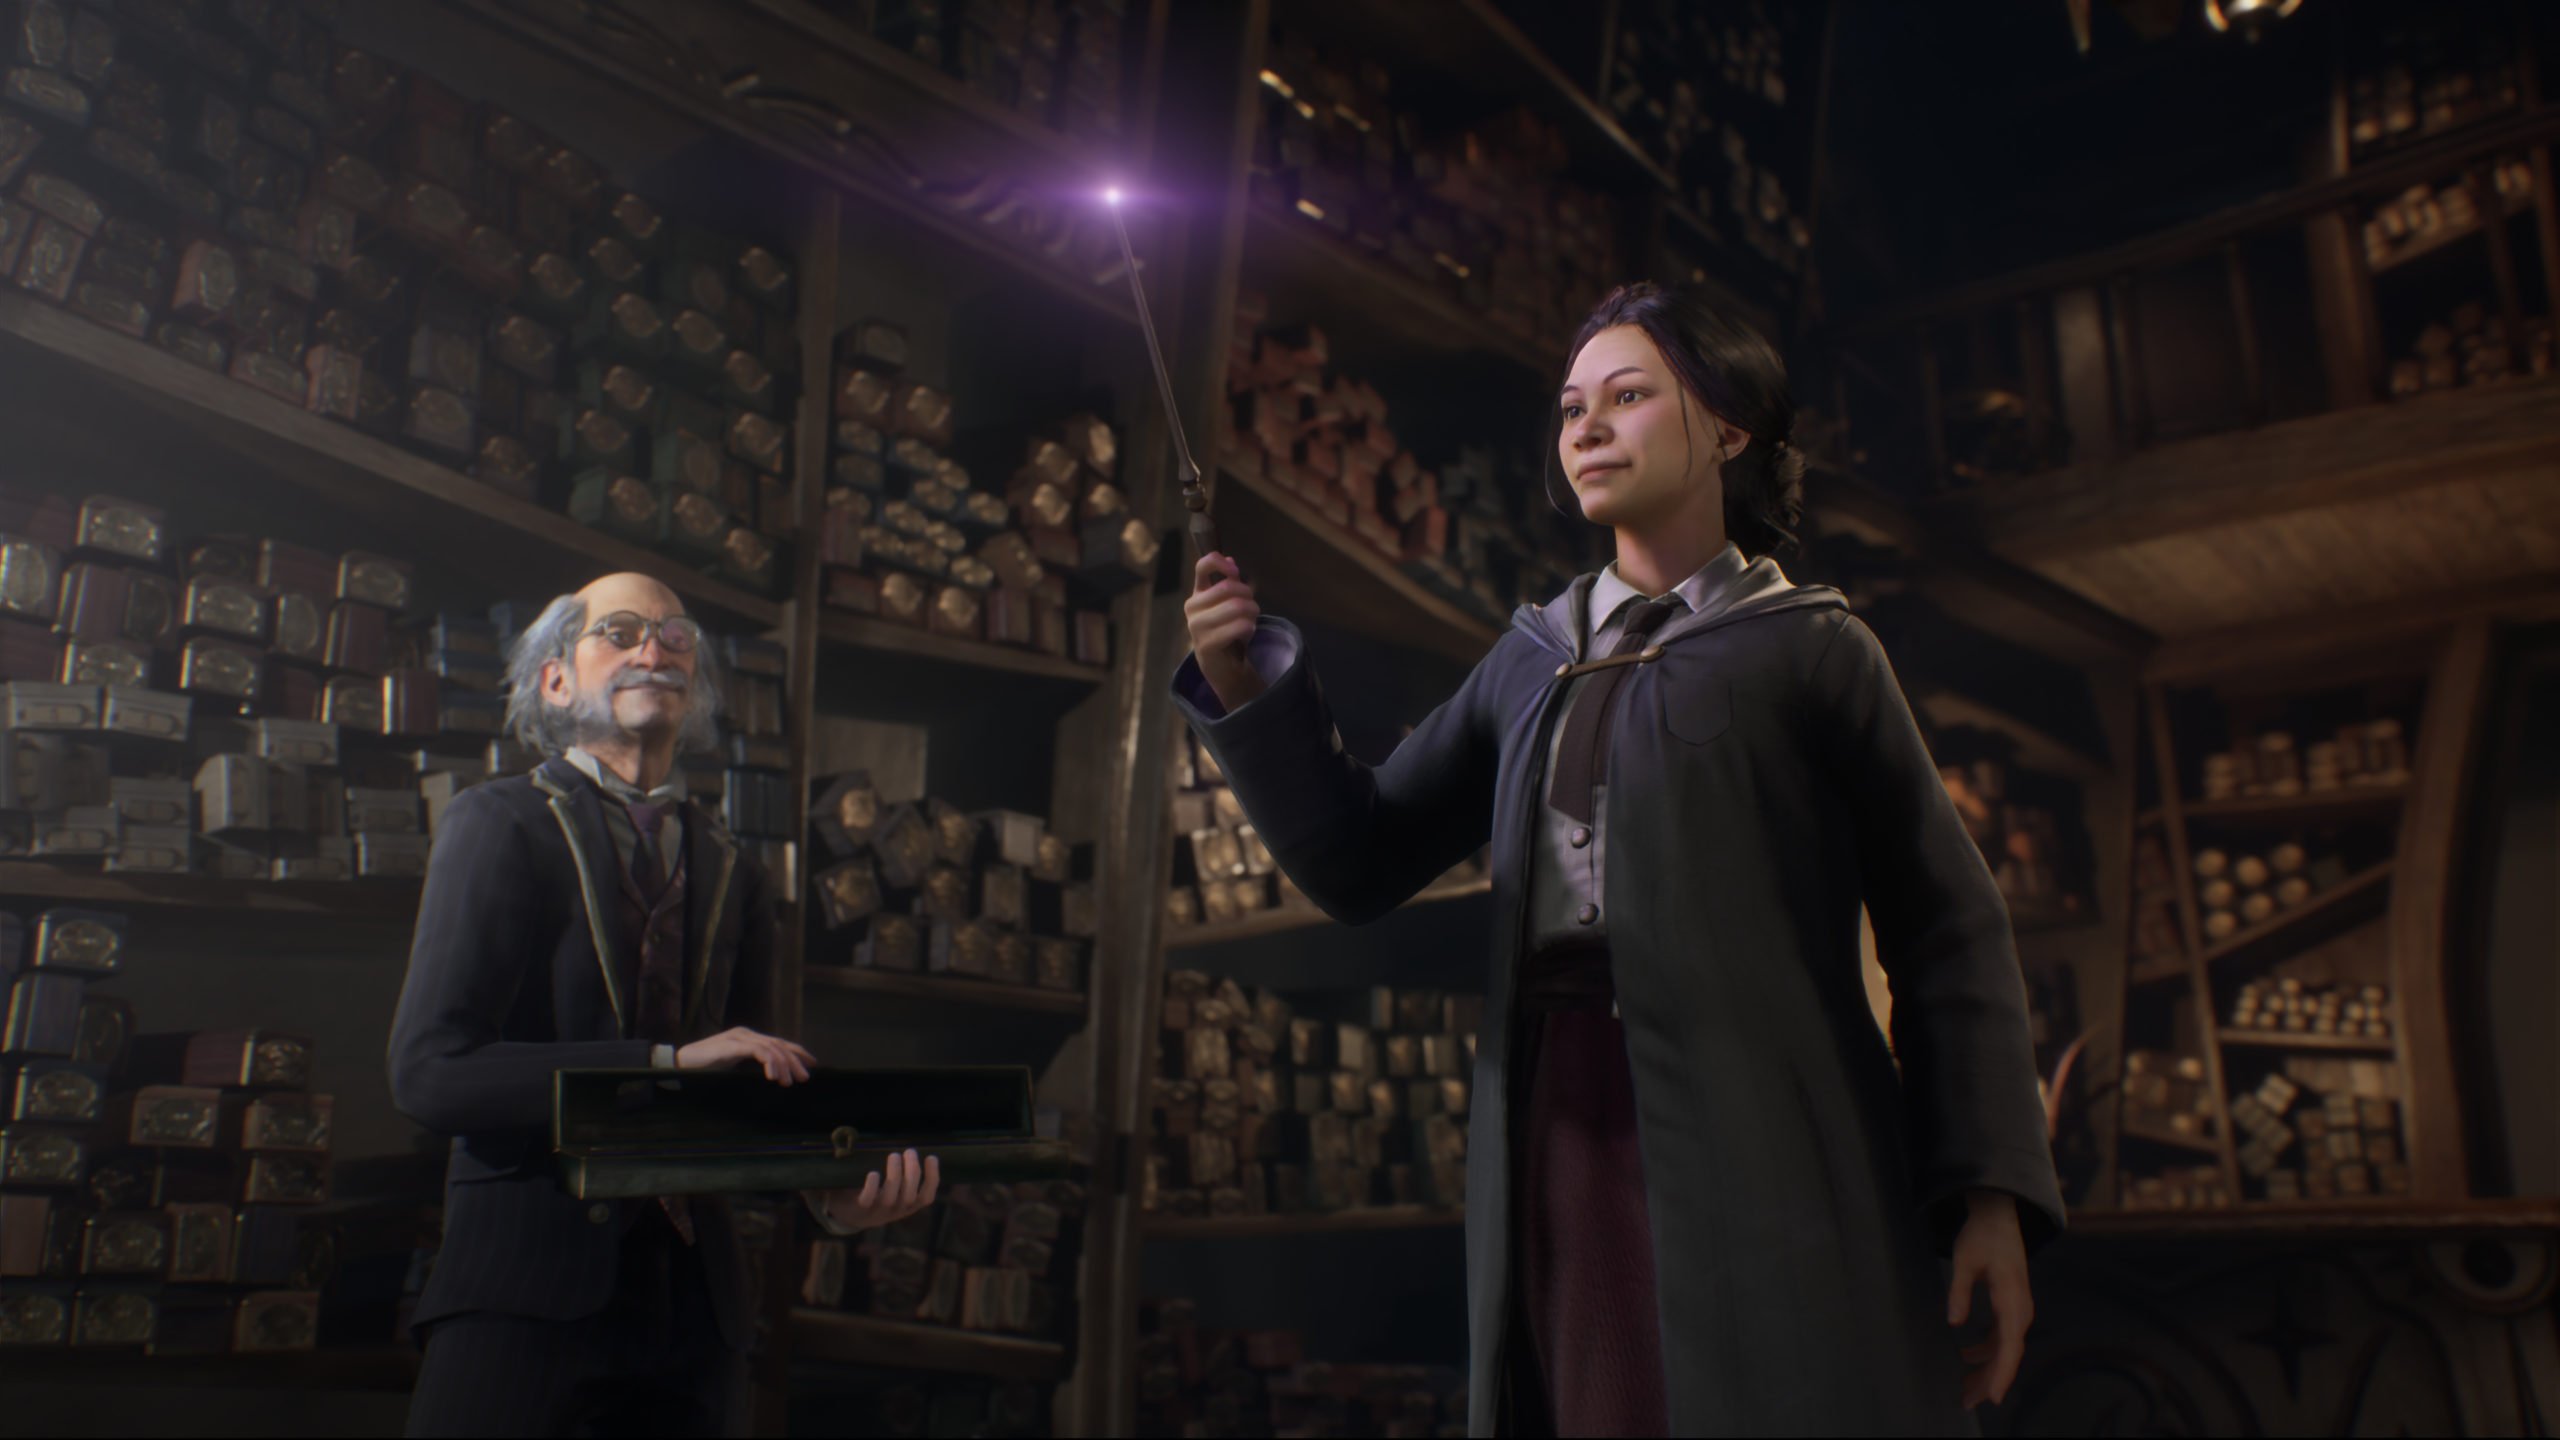 hogwarts legacy steam early access time